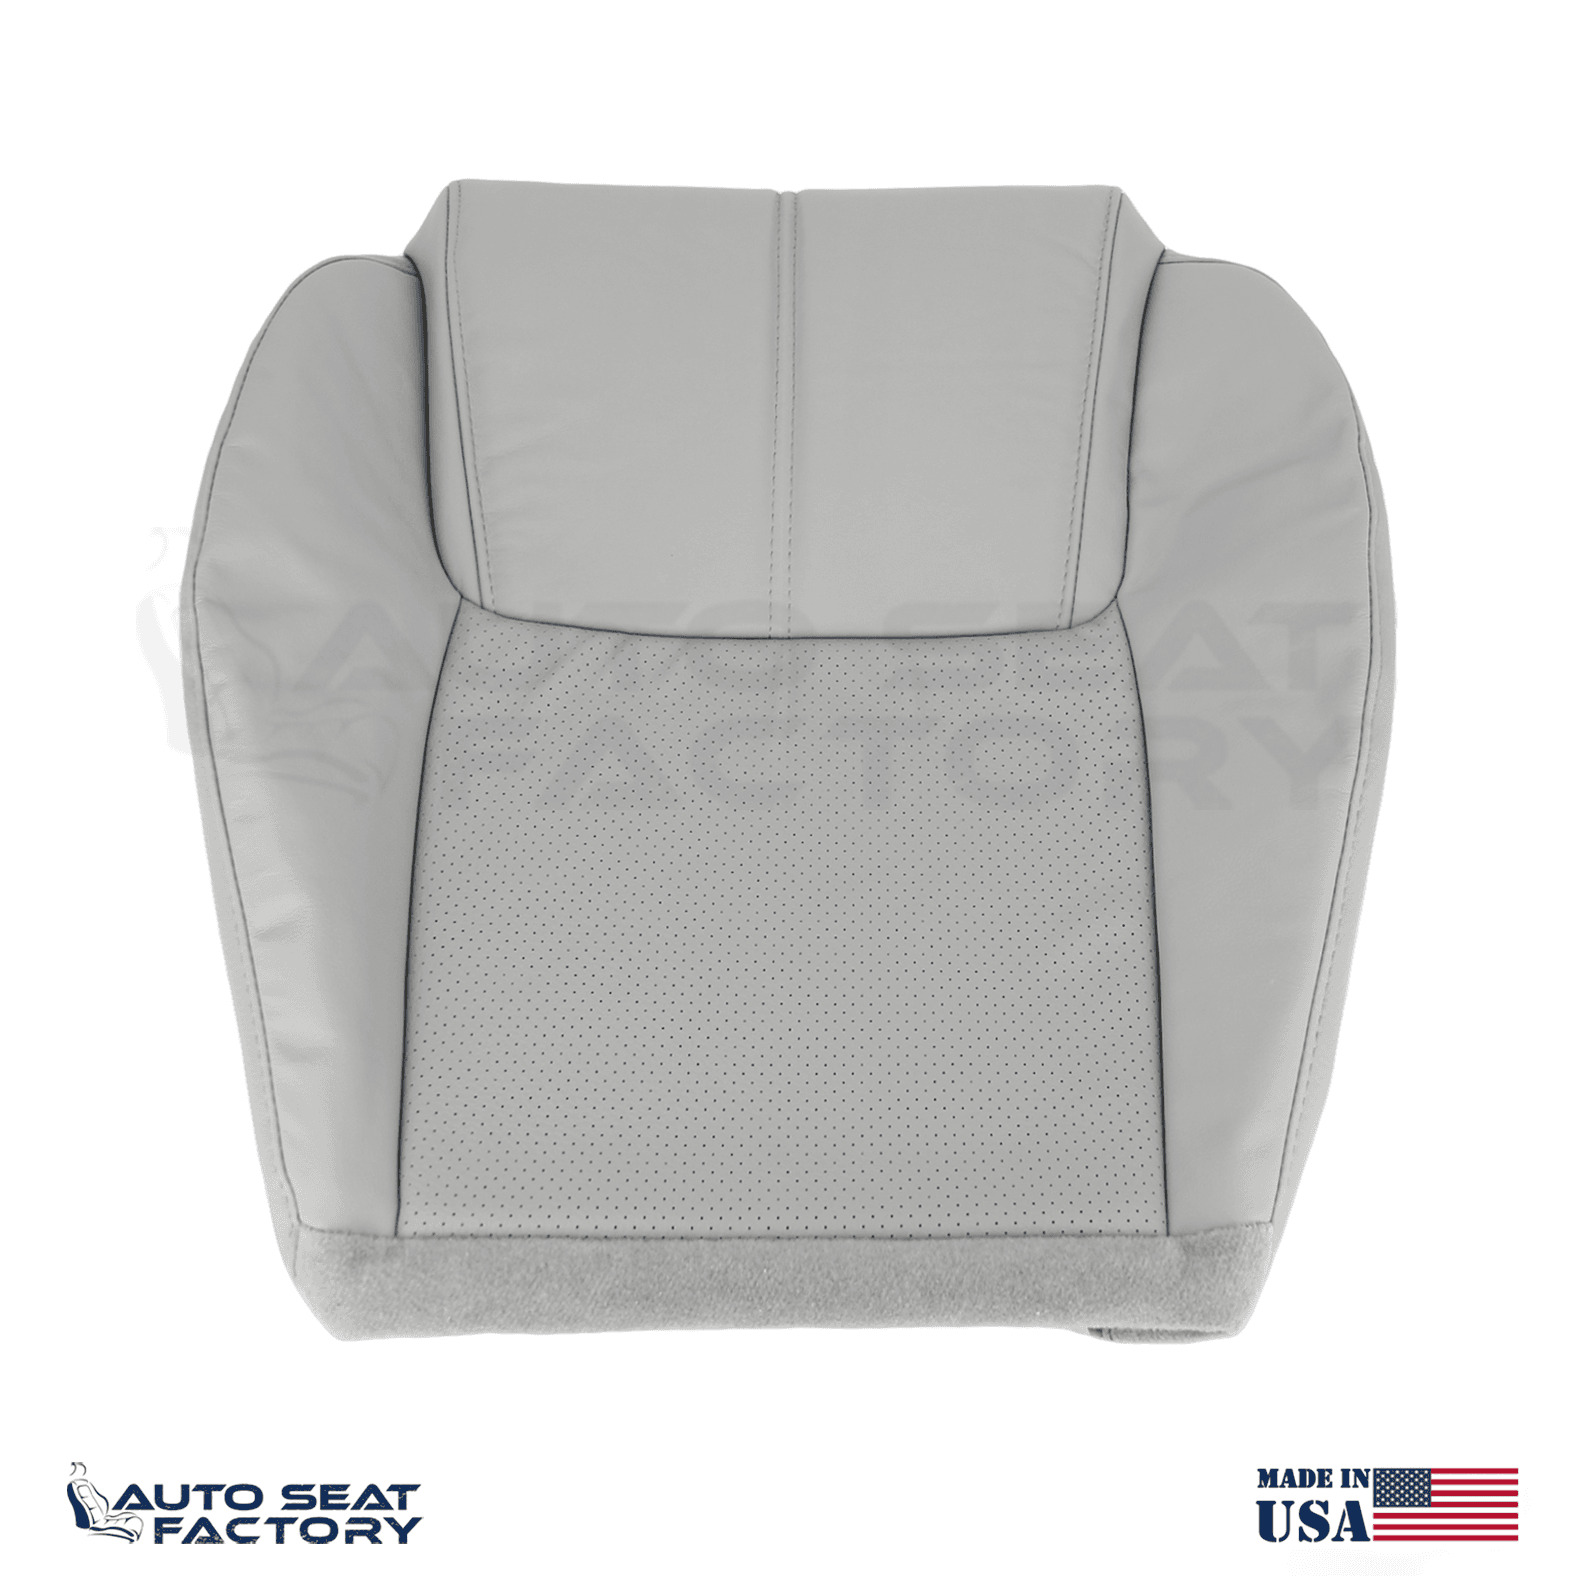 Replacement Perforated Seat Cover Fits Jeep Commander 2006 - 2010 Driver Bottom